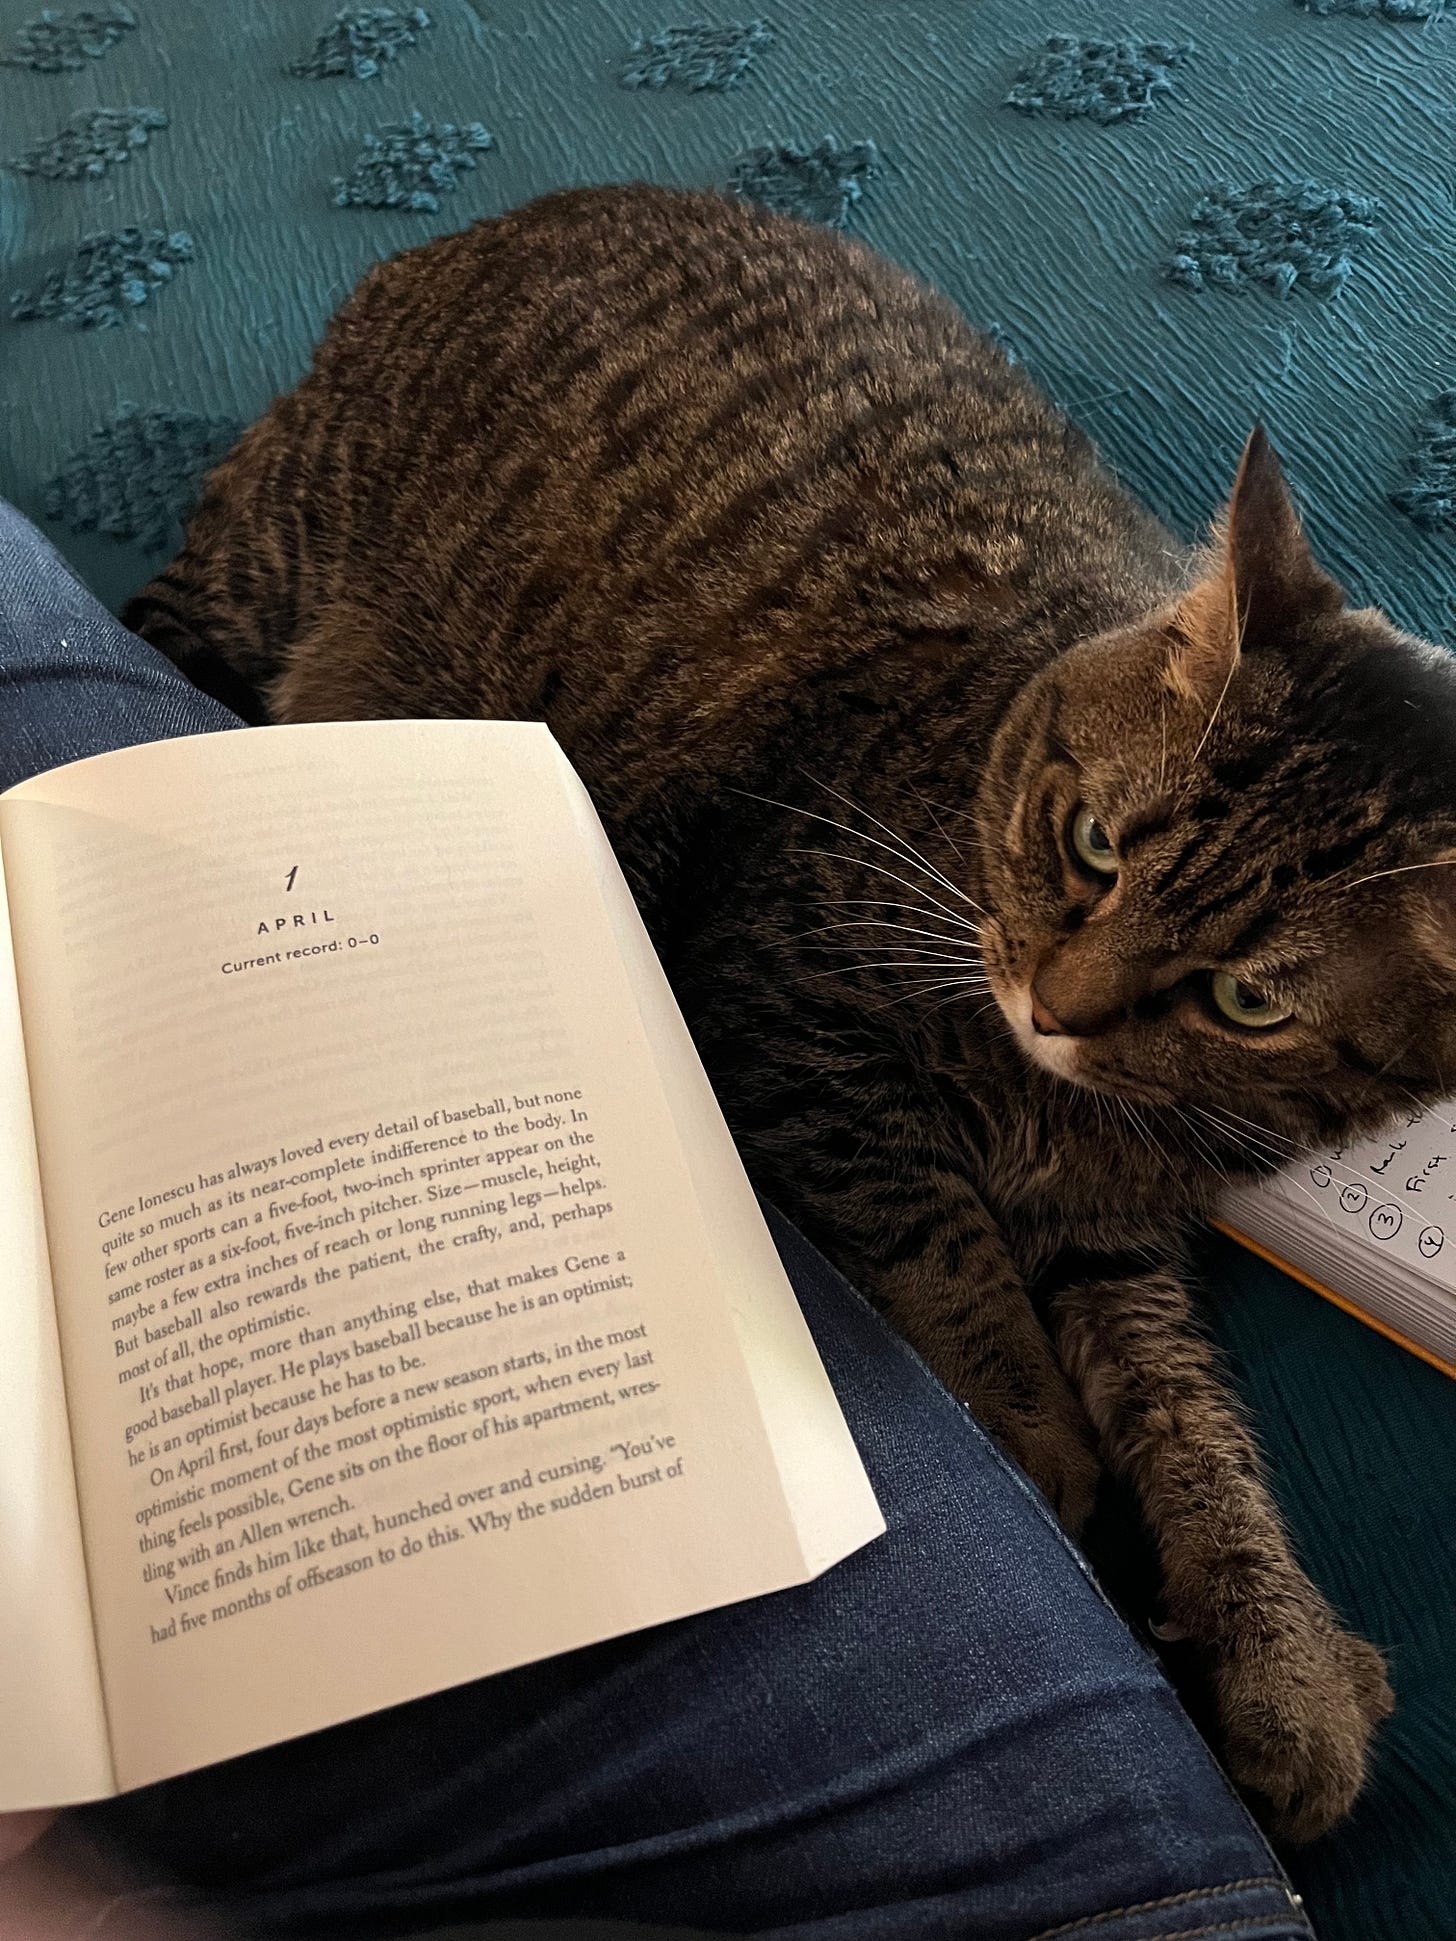 Picture of a copy of THE PROSPECTS open on my lap to the first page, with a grey-and-brown striped cat snuggled up next to my leg, on top of a teal bedspread.